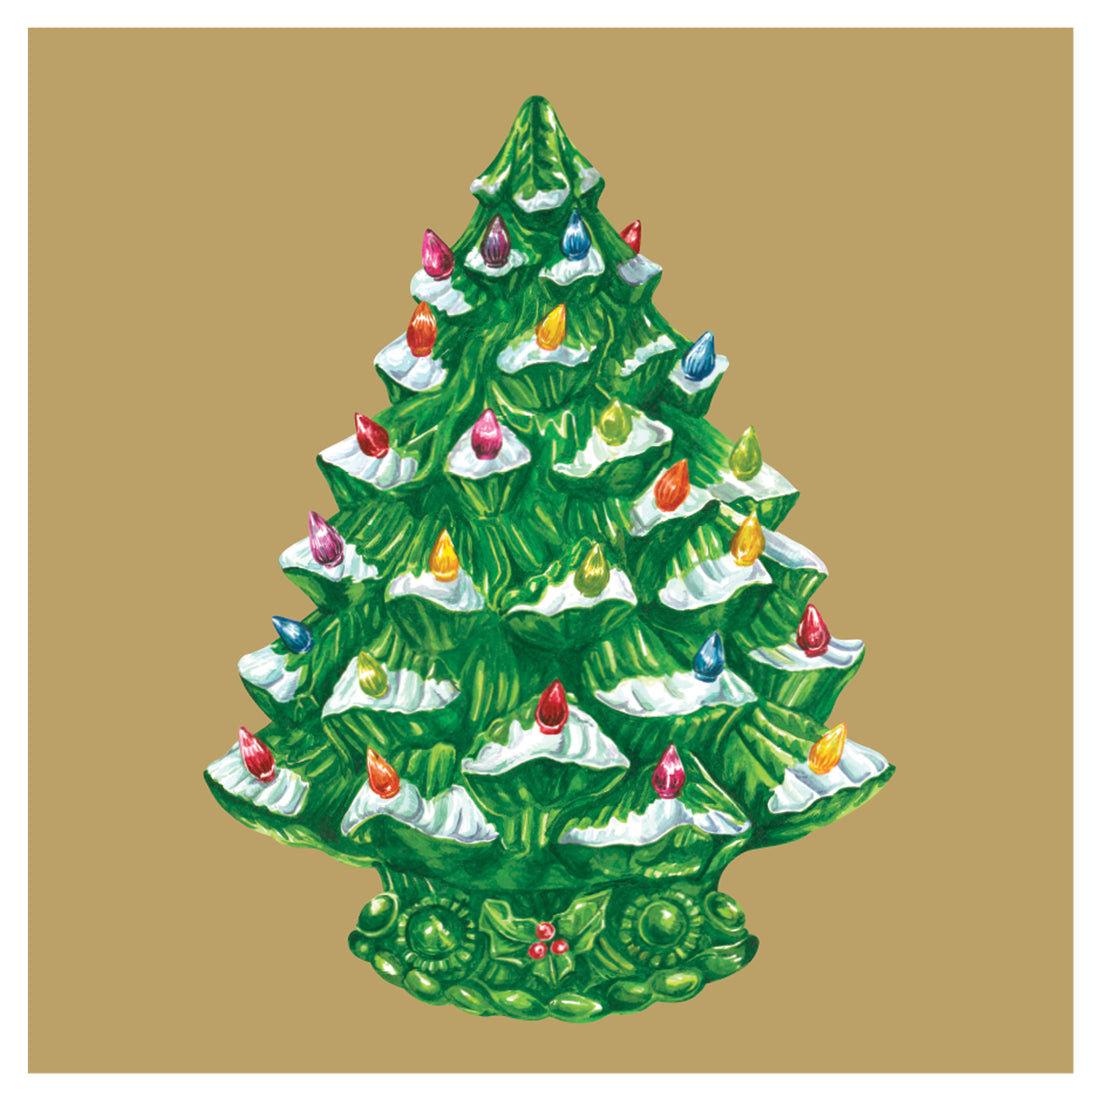 A square, gold cocktail napkin featuring a vintage green ceramic Christmas tree decoration, complete with snow-tipped branches and multi-colored lights.